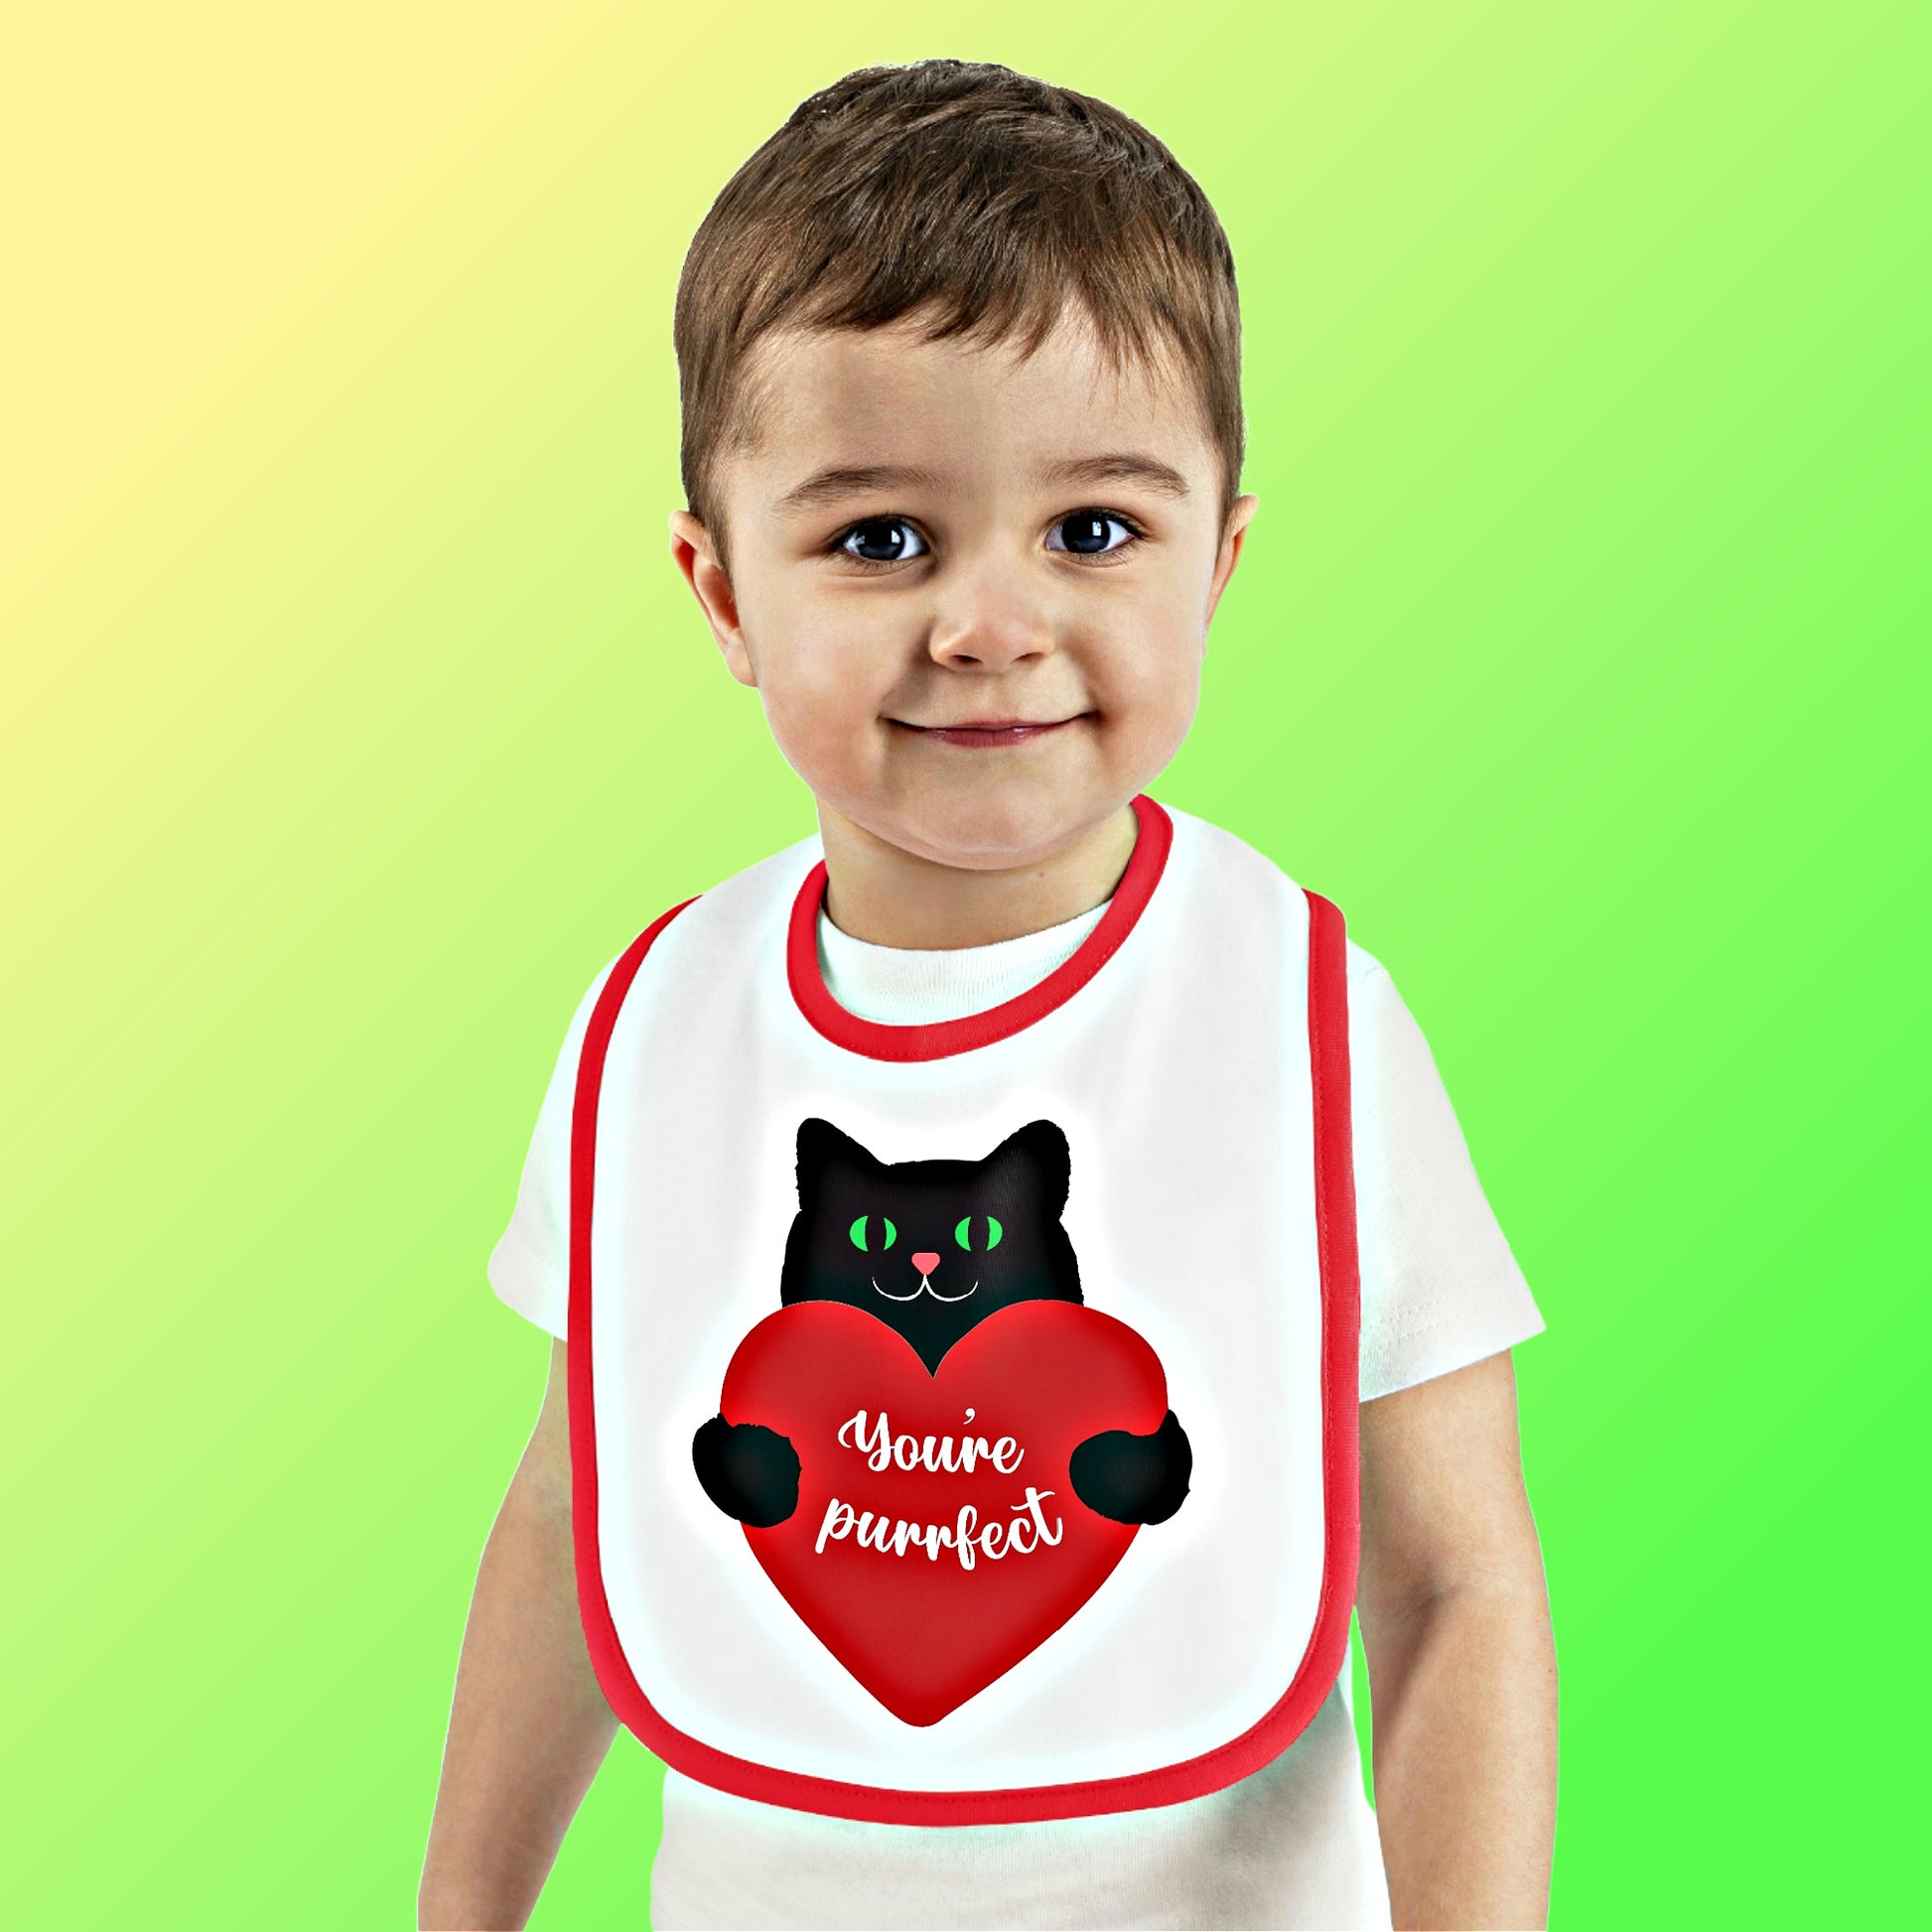 Mock up of a young child wearing our bib